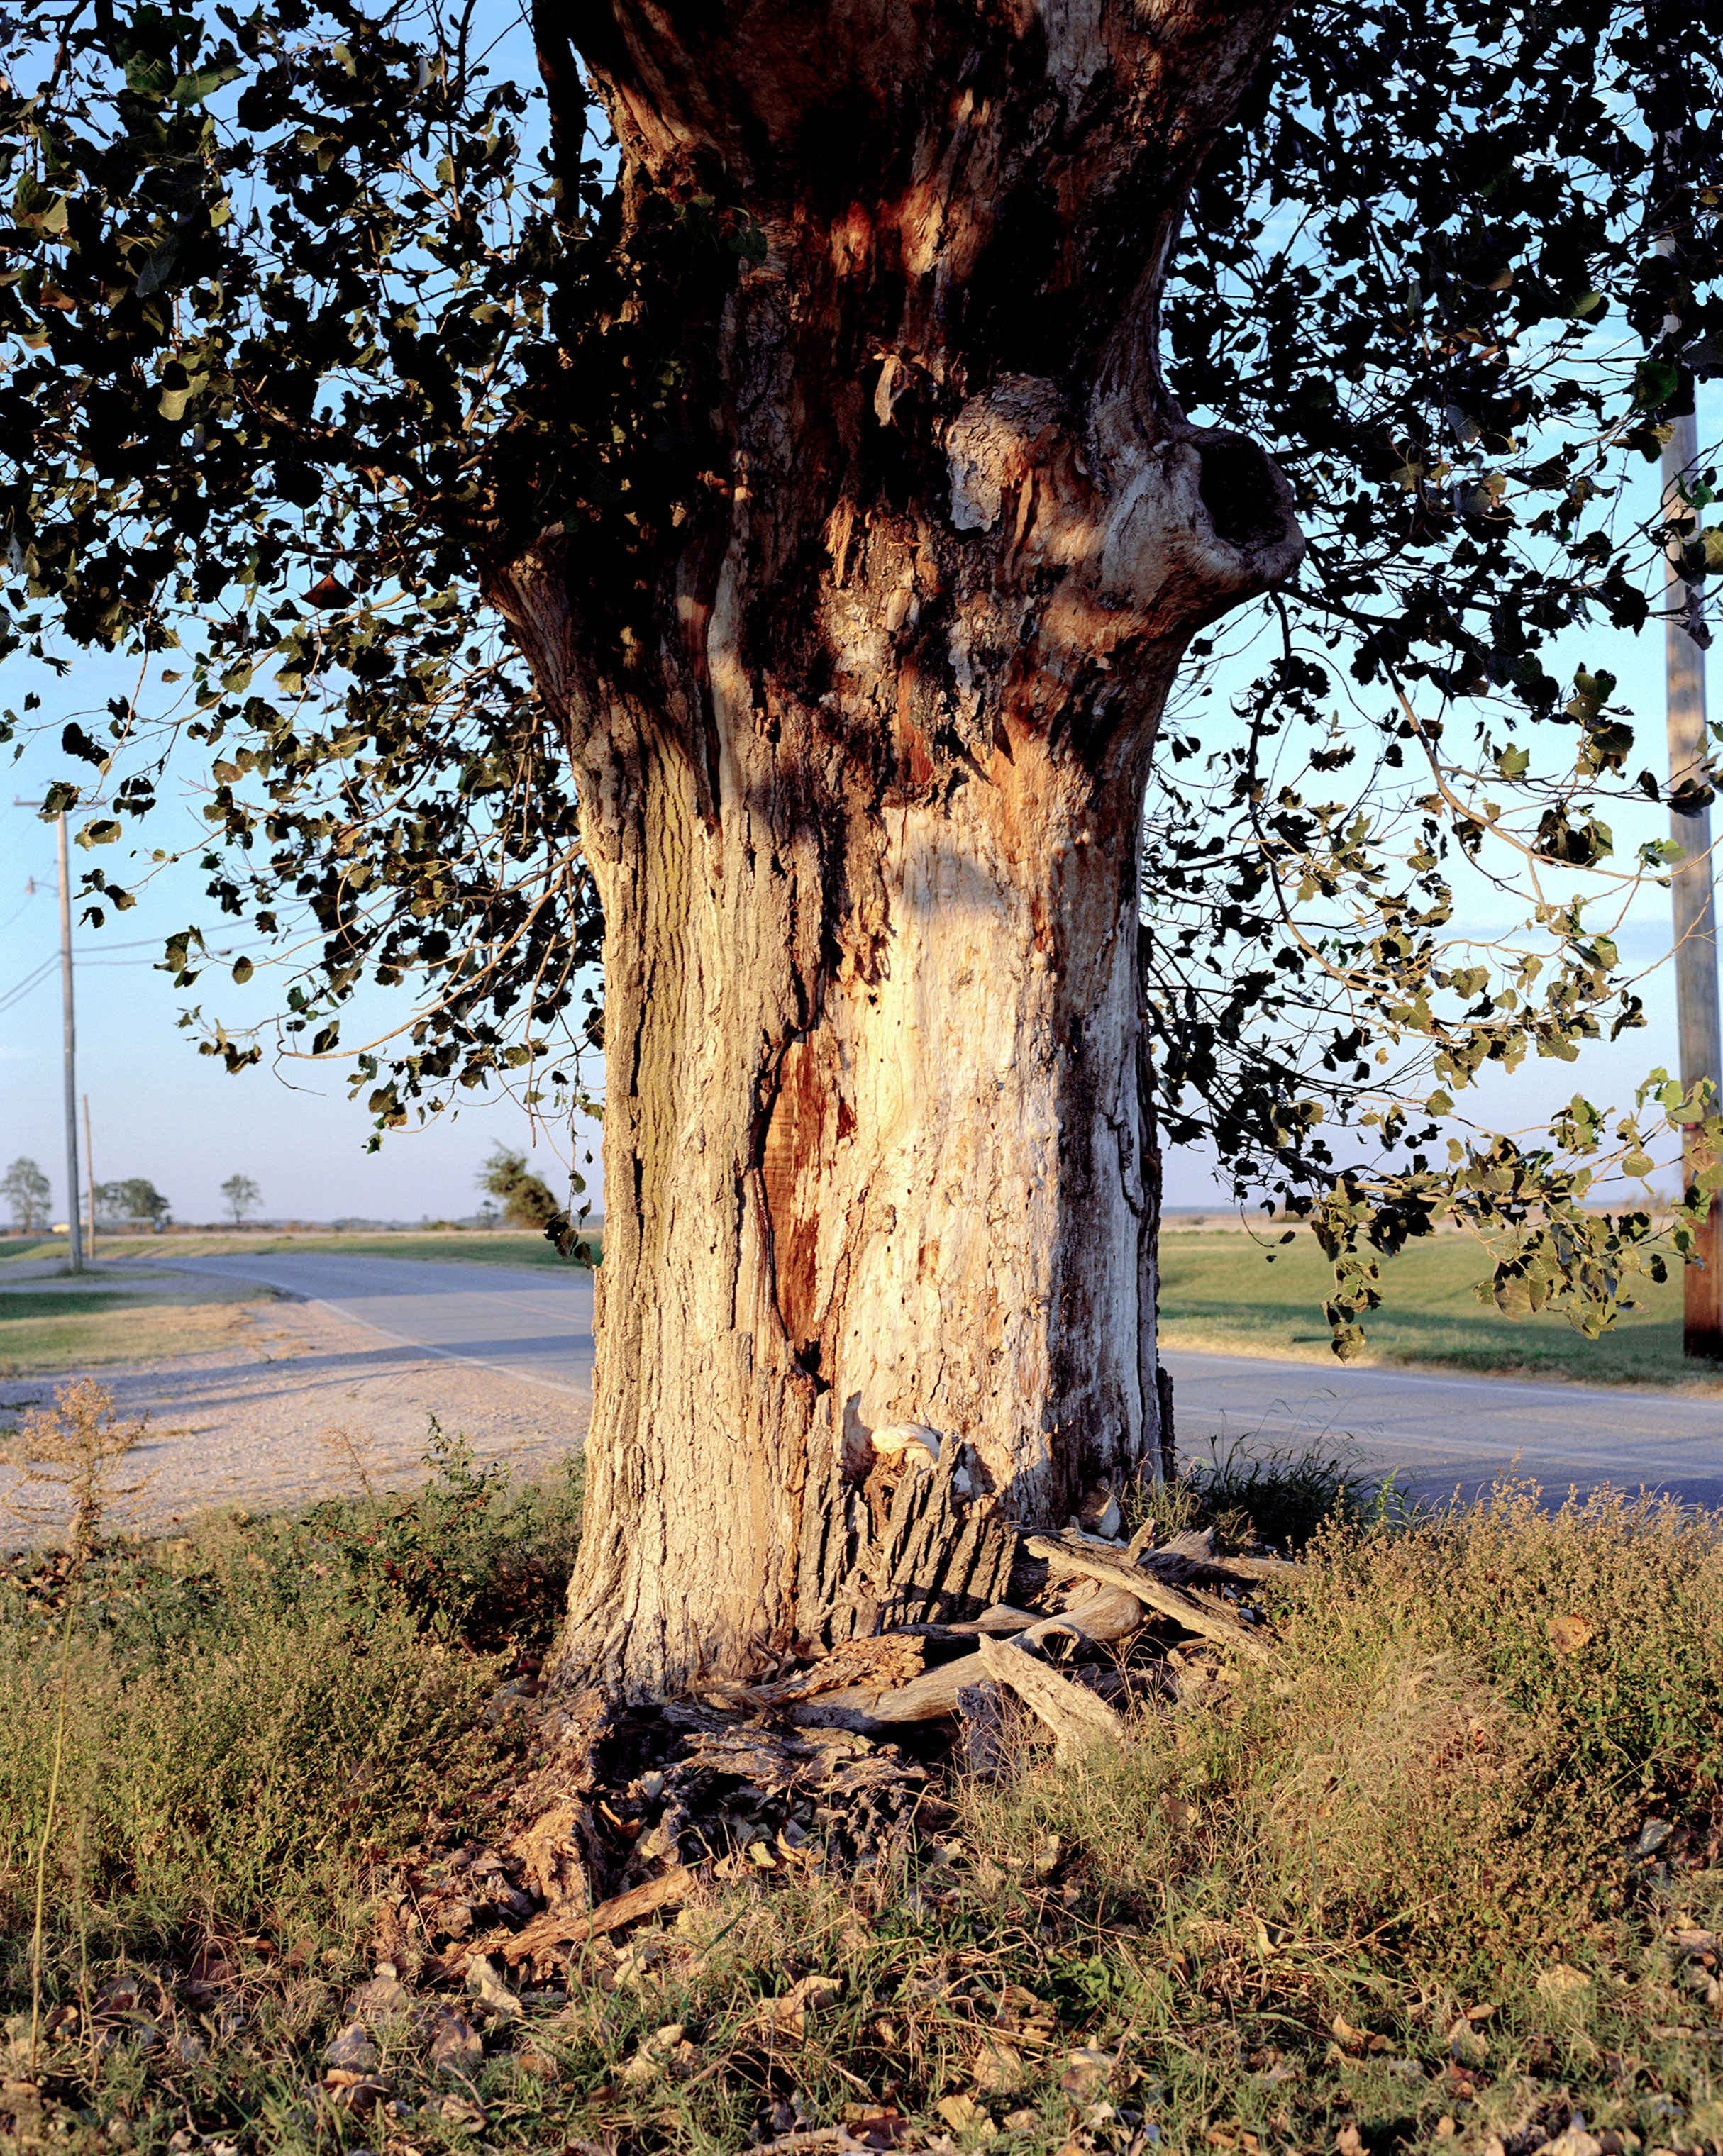 A tree in Phillips County, Ark., where a hanging may have occurred during the 1919 Race Massacre, one the deadliest mass lynchings in U.S history. (Johnathon Kelso)